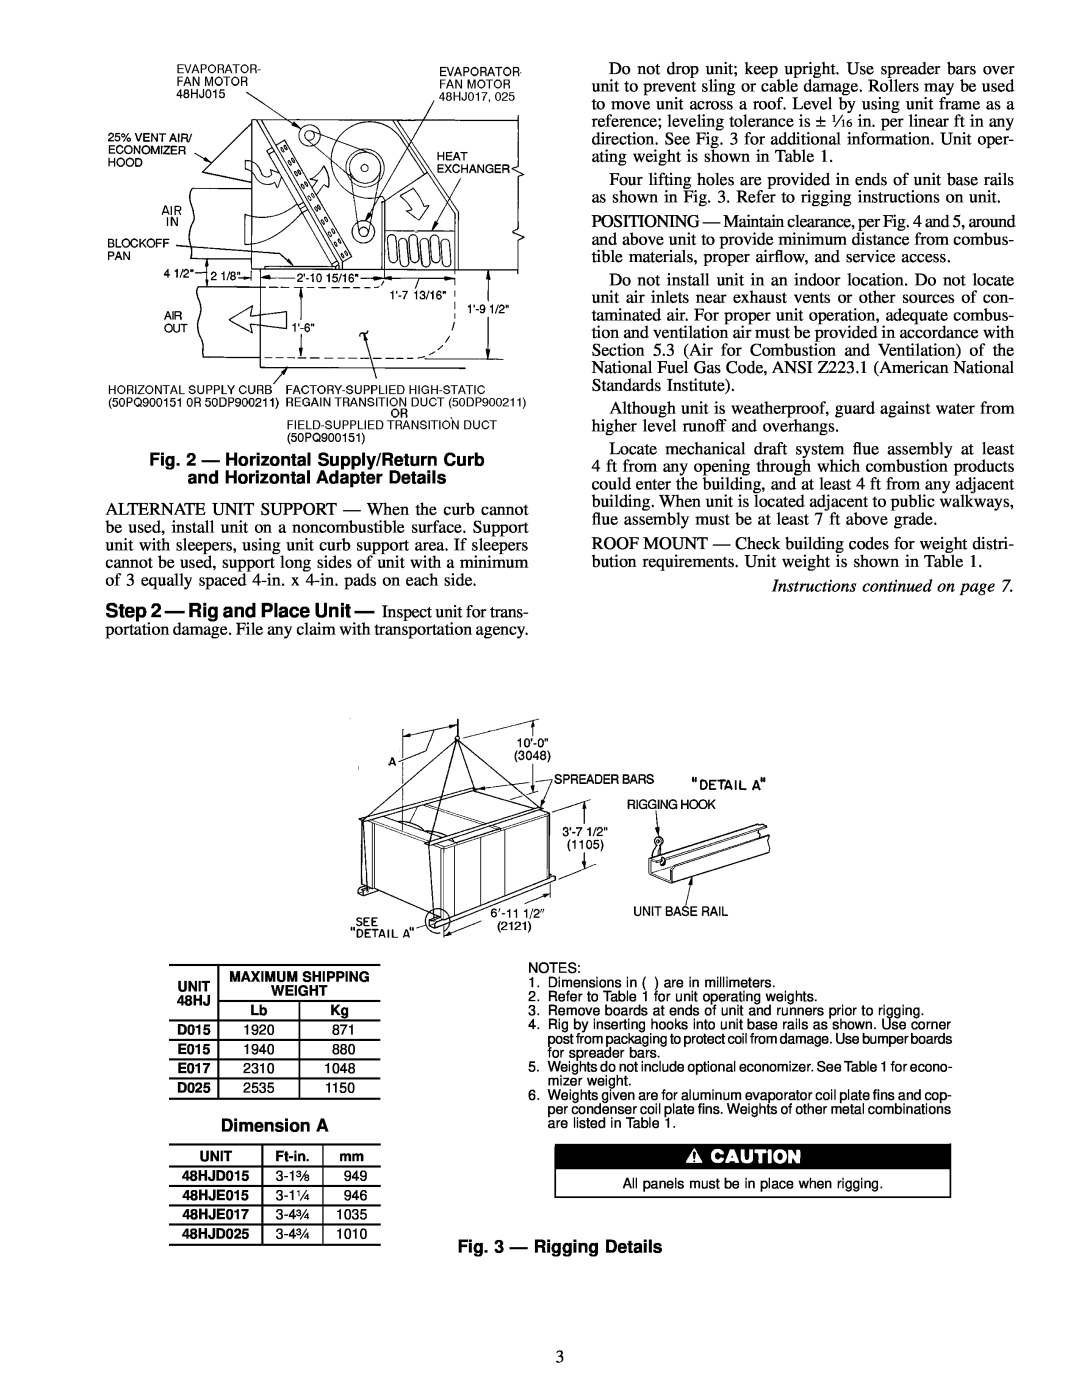 Carrier 48HJ015-025 Ð Horizontal Supply/Return Curb, and Horizontal Adapter Details, Instructions continued on page 